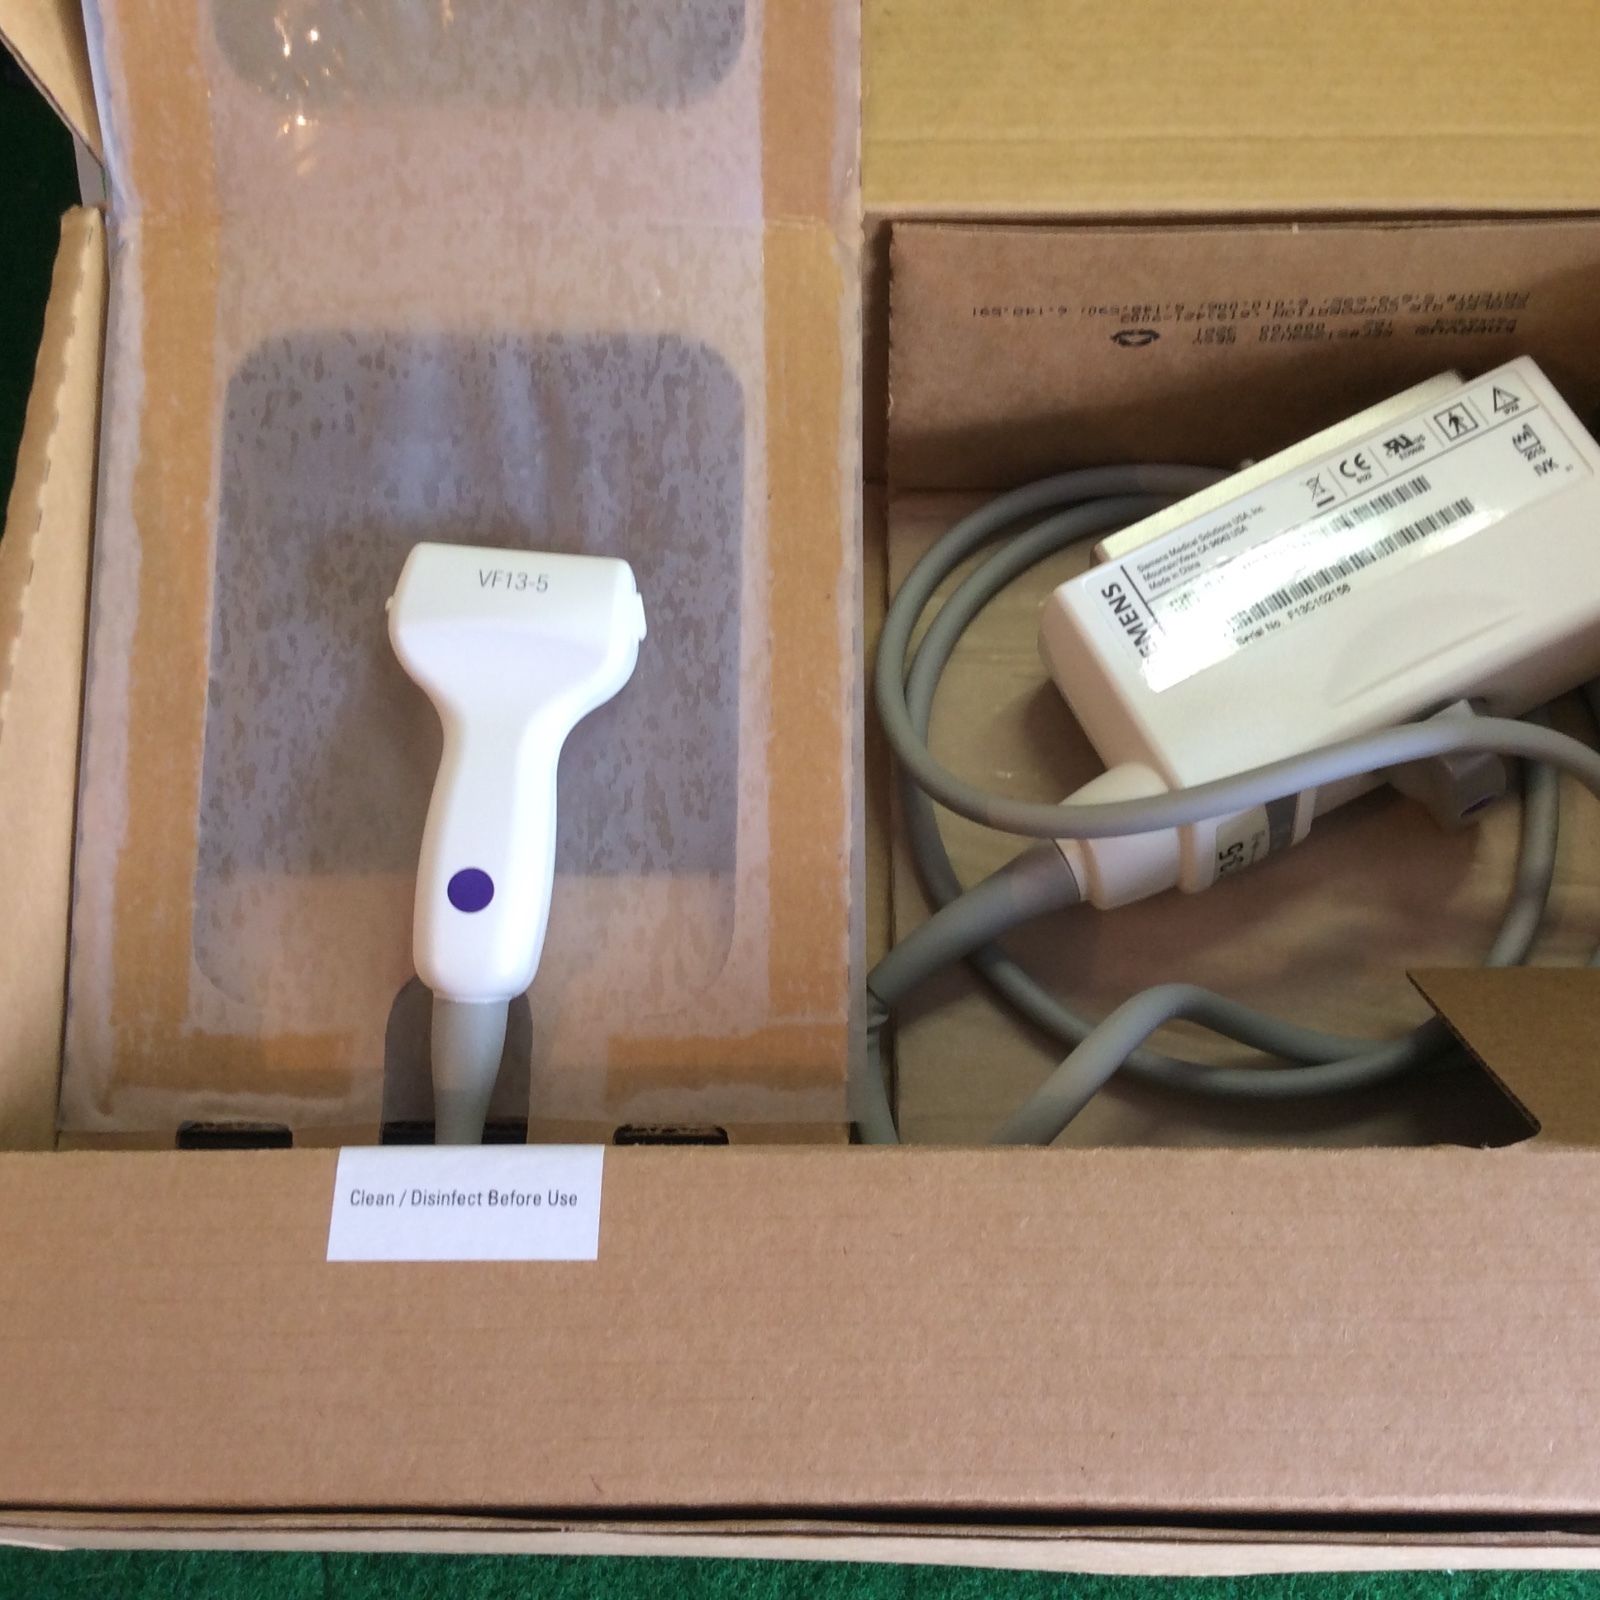 Siemens Antares VF13-5Ultrasound Transducer Probe - 2D Linear 3-7Mhz 0439649 NEW DIAGNOSTIC ULTRASOUND MACHINES FOR SALE